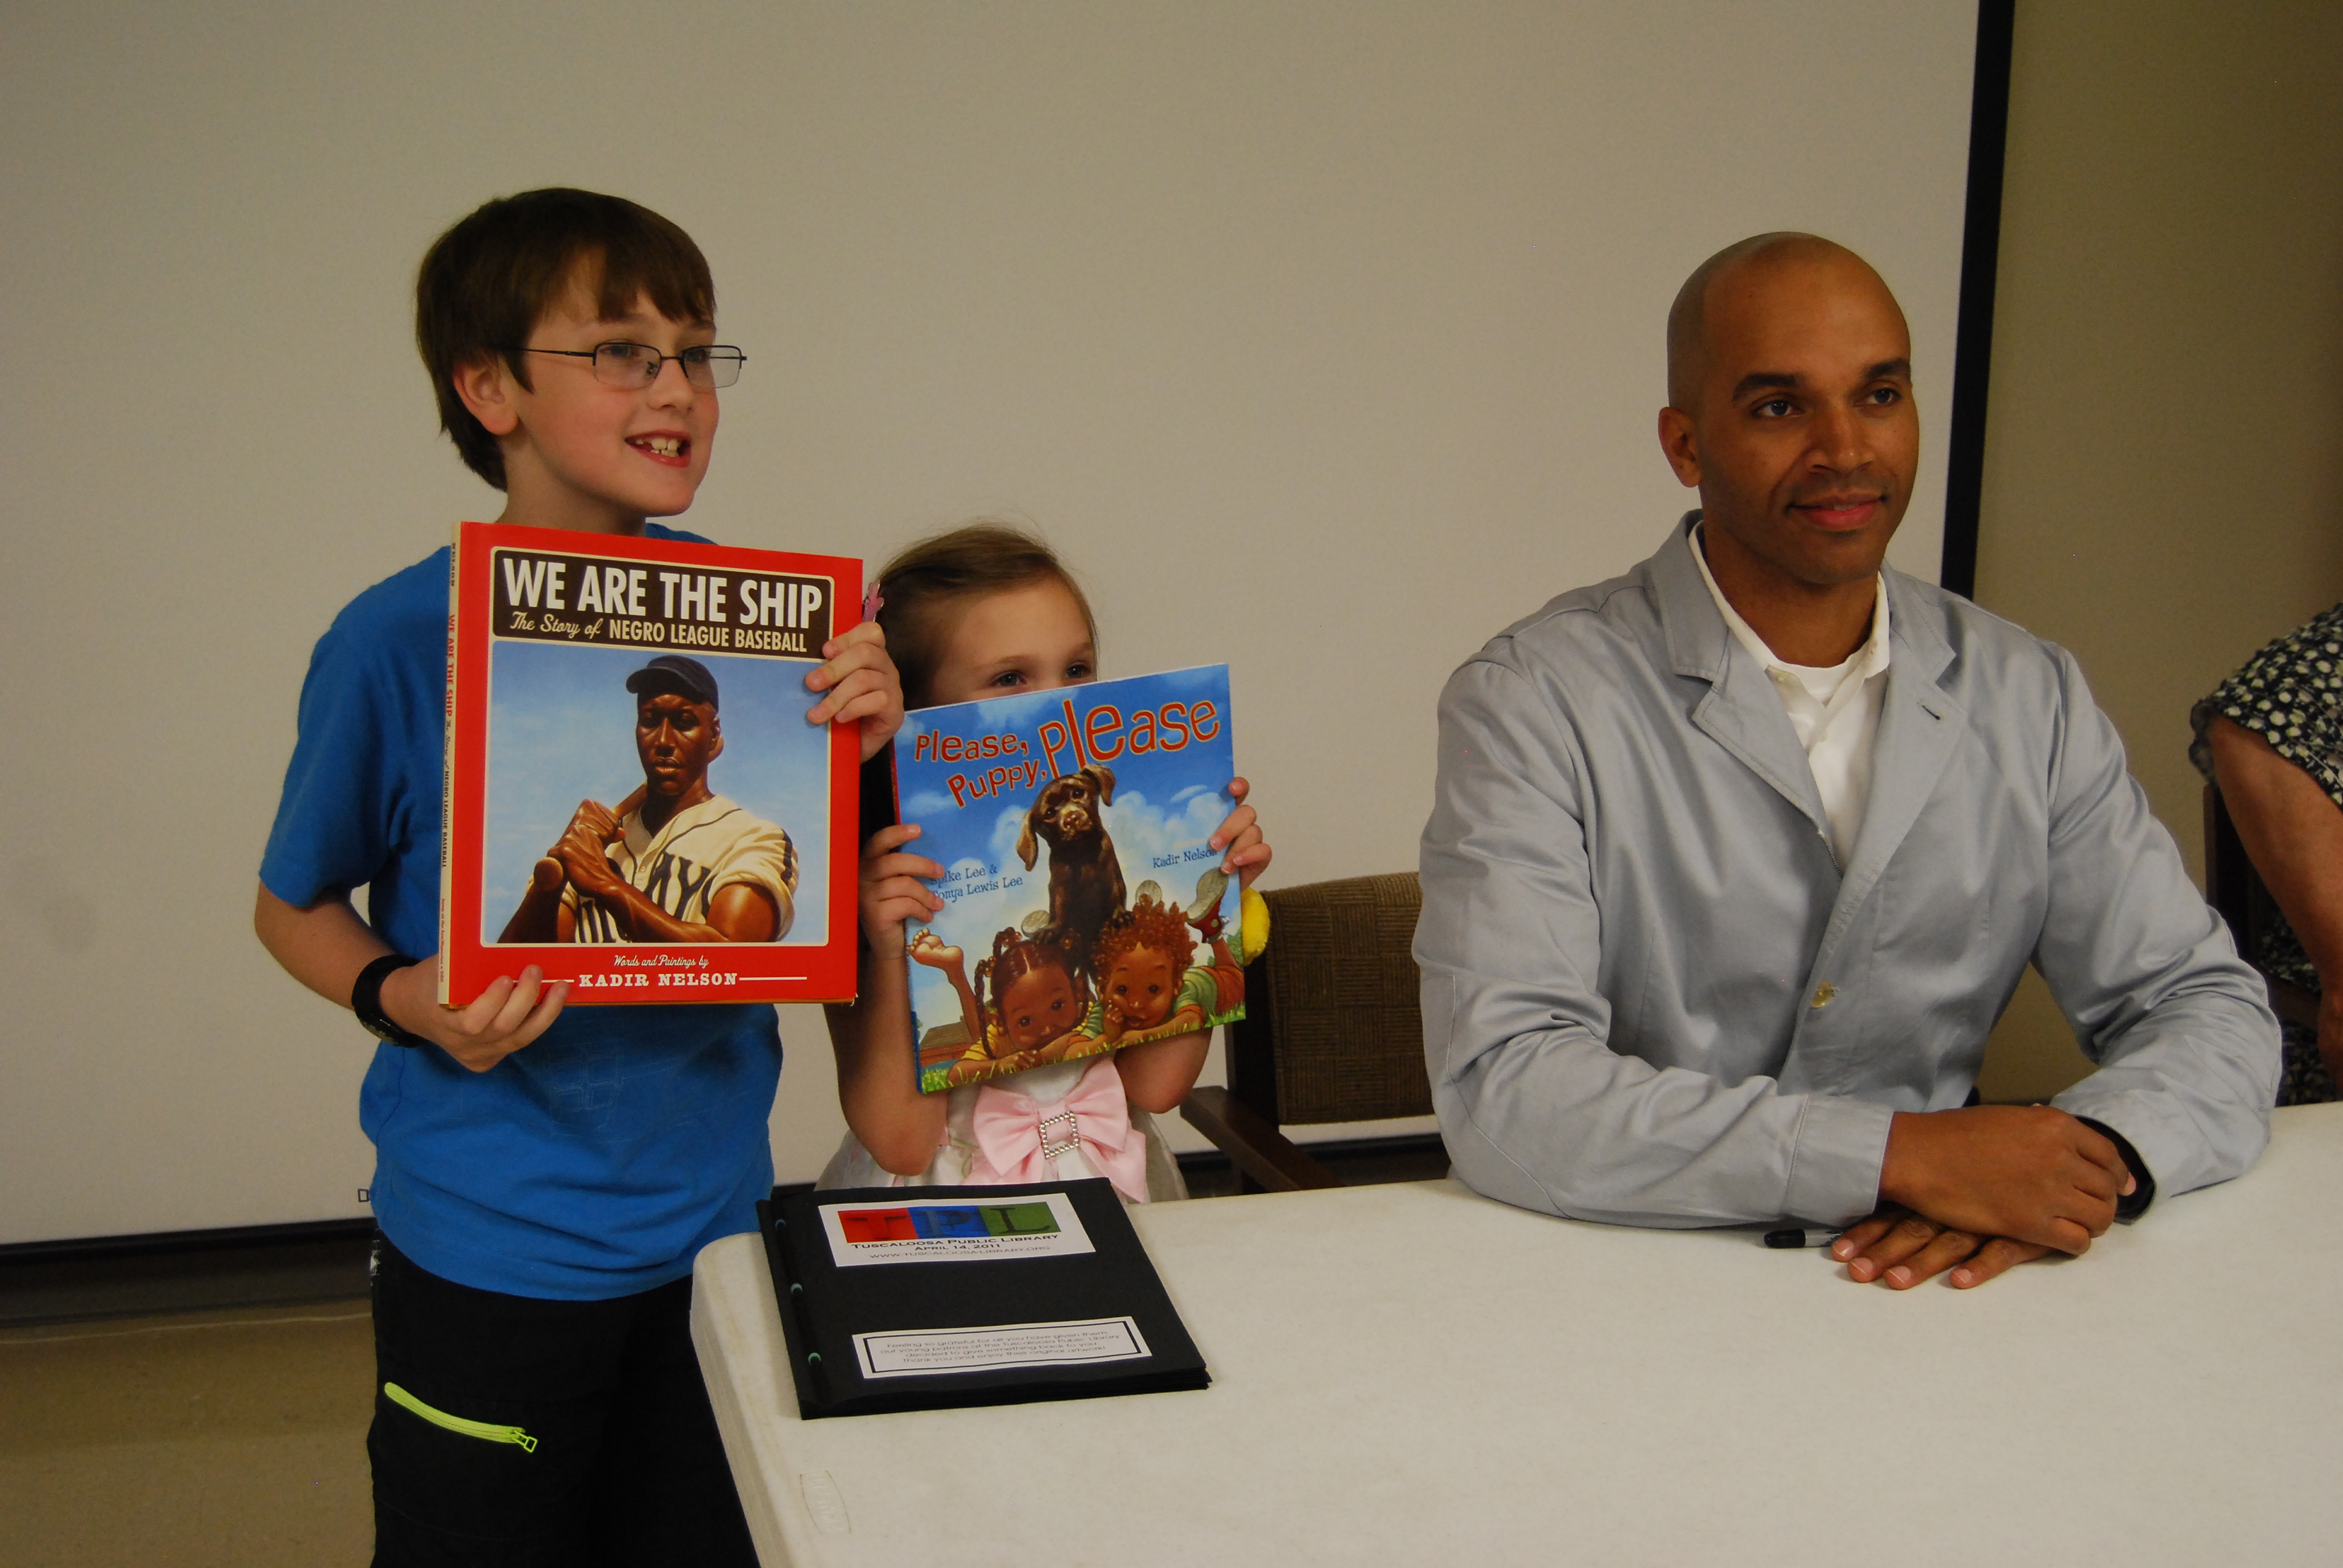 Award-winning author and illustrator Kadir Nelson joins (from left) Blaine and Kyra Richardson during a book signing at Tuscaloosa (Ala.) Public Library’s main branch.